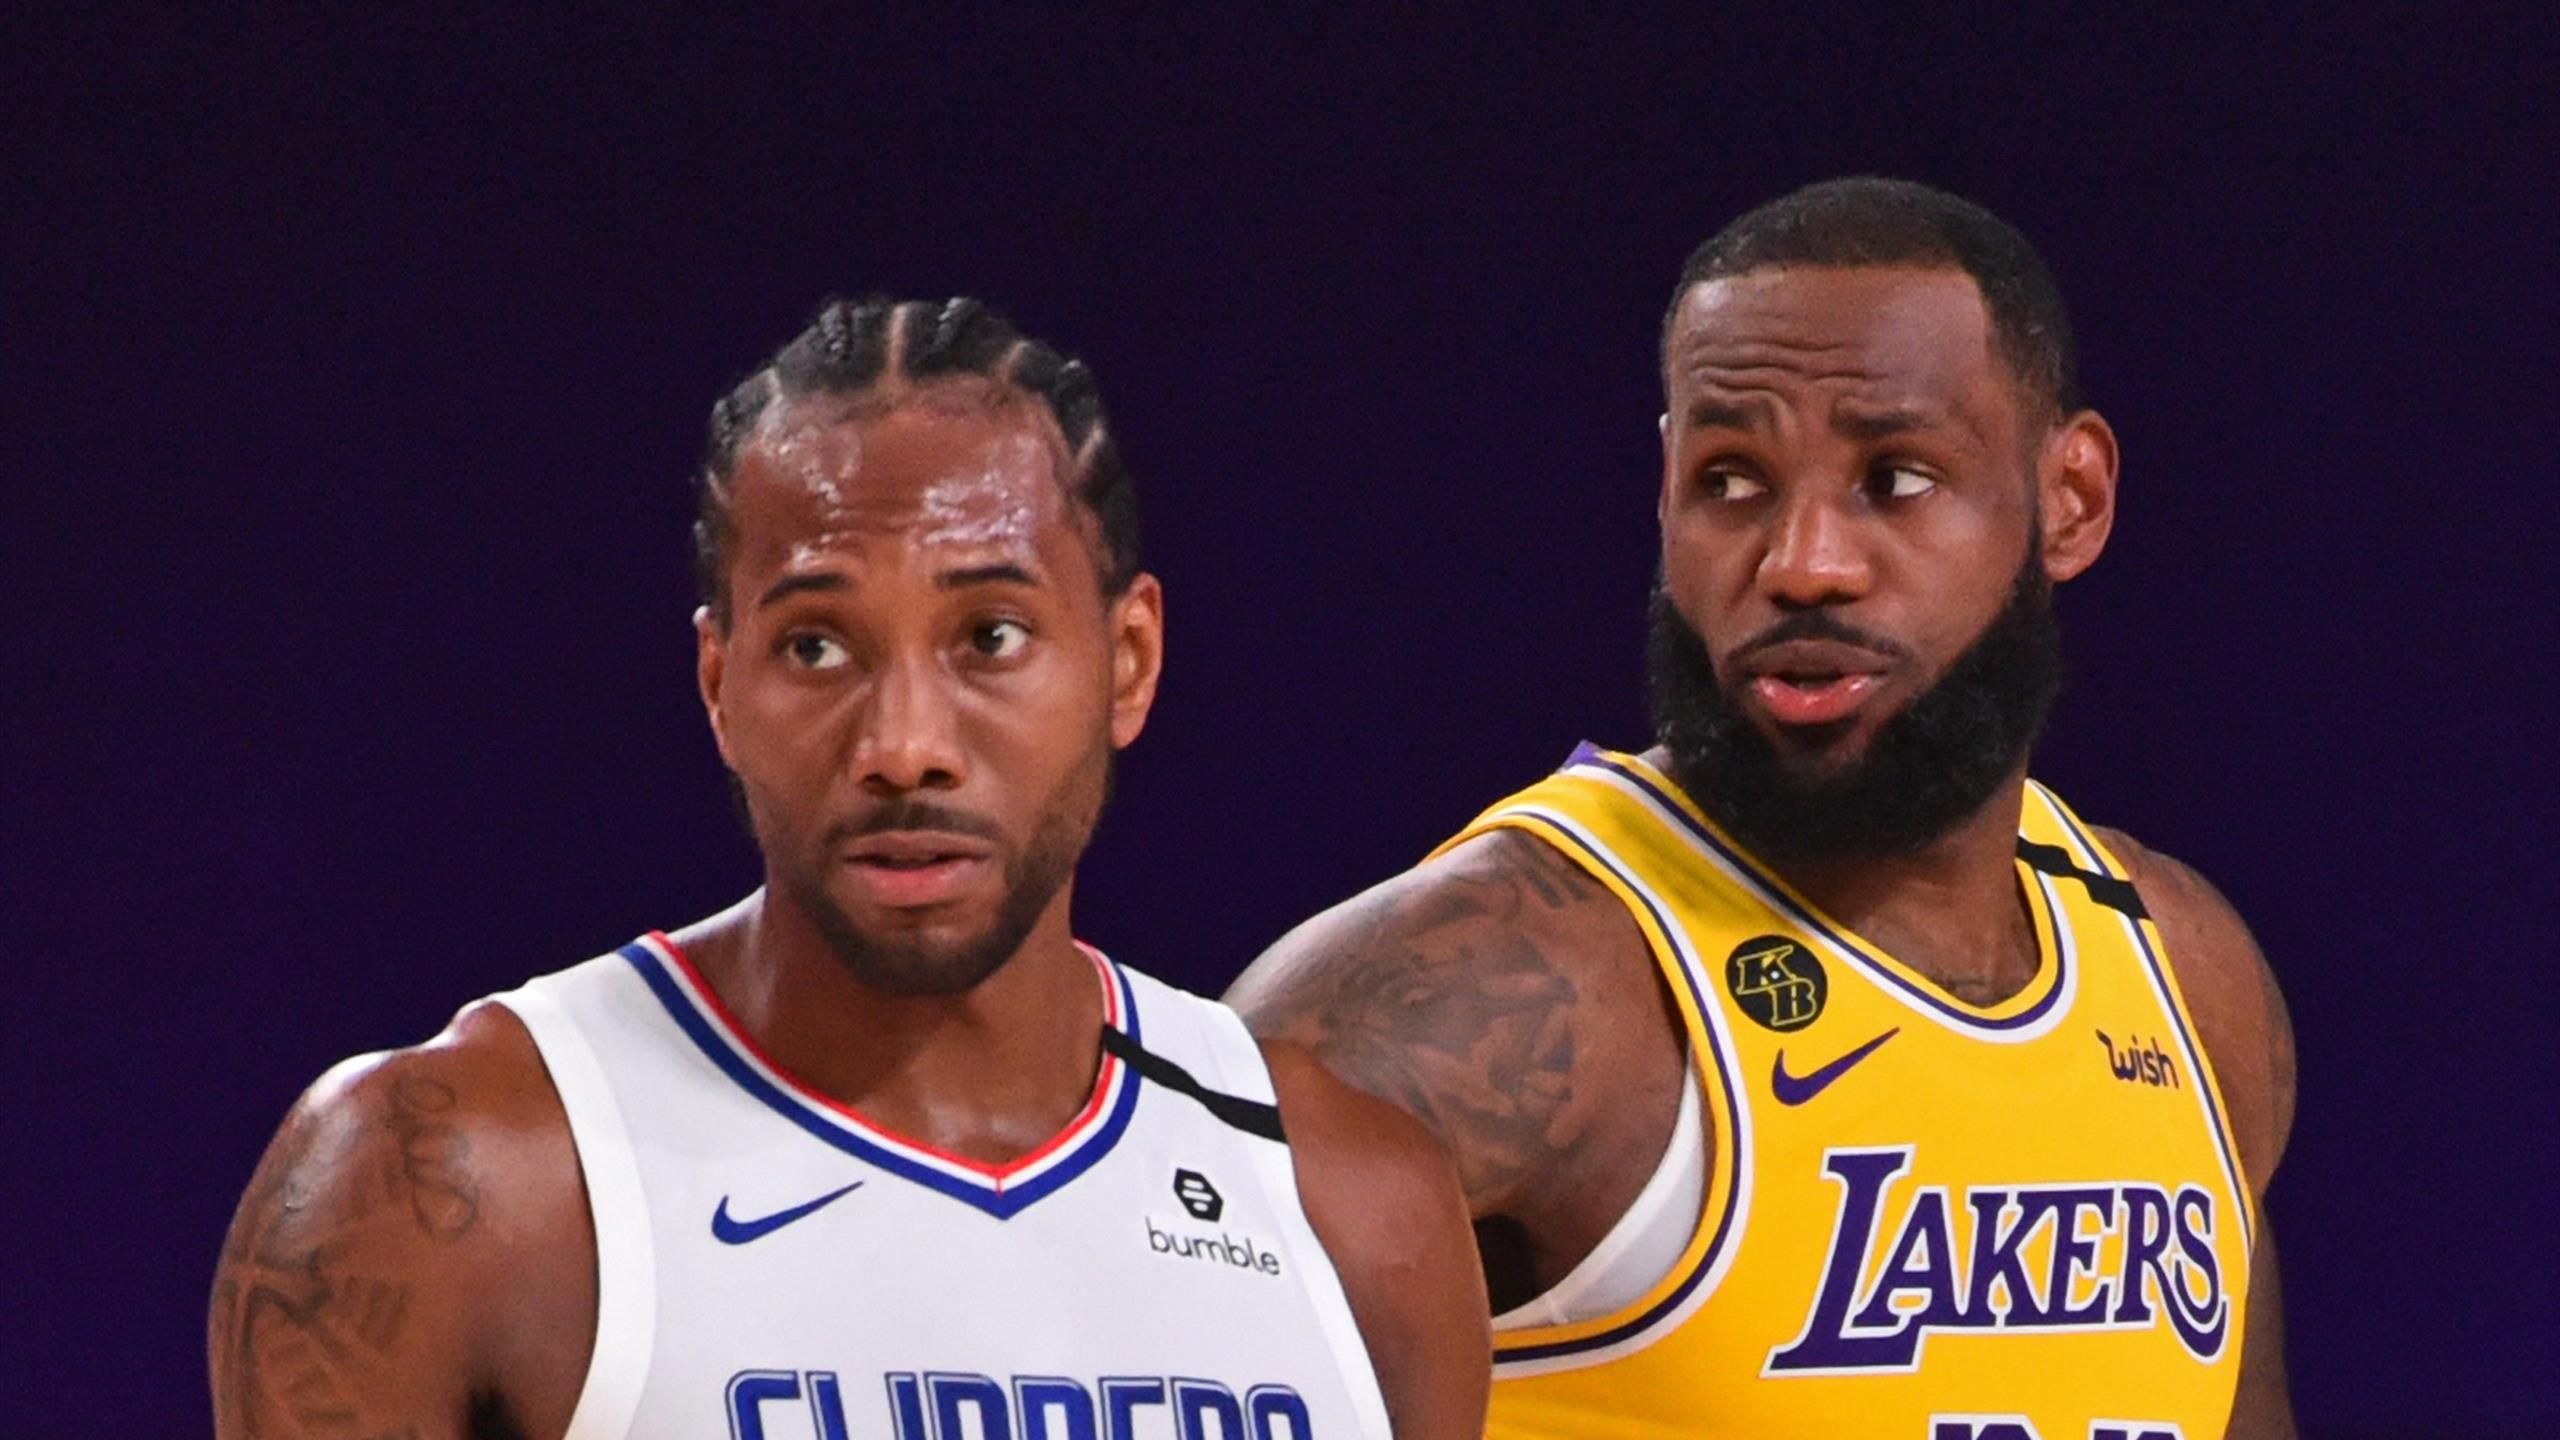 NBA players decide to restart playoffs after LA Clippers and LA Lakers vote  for boycott - reports - Eurosport